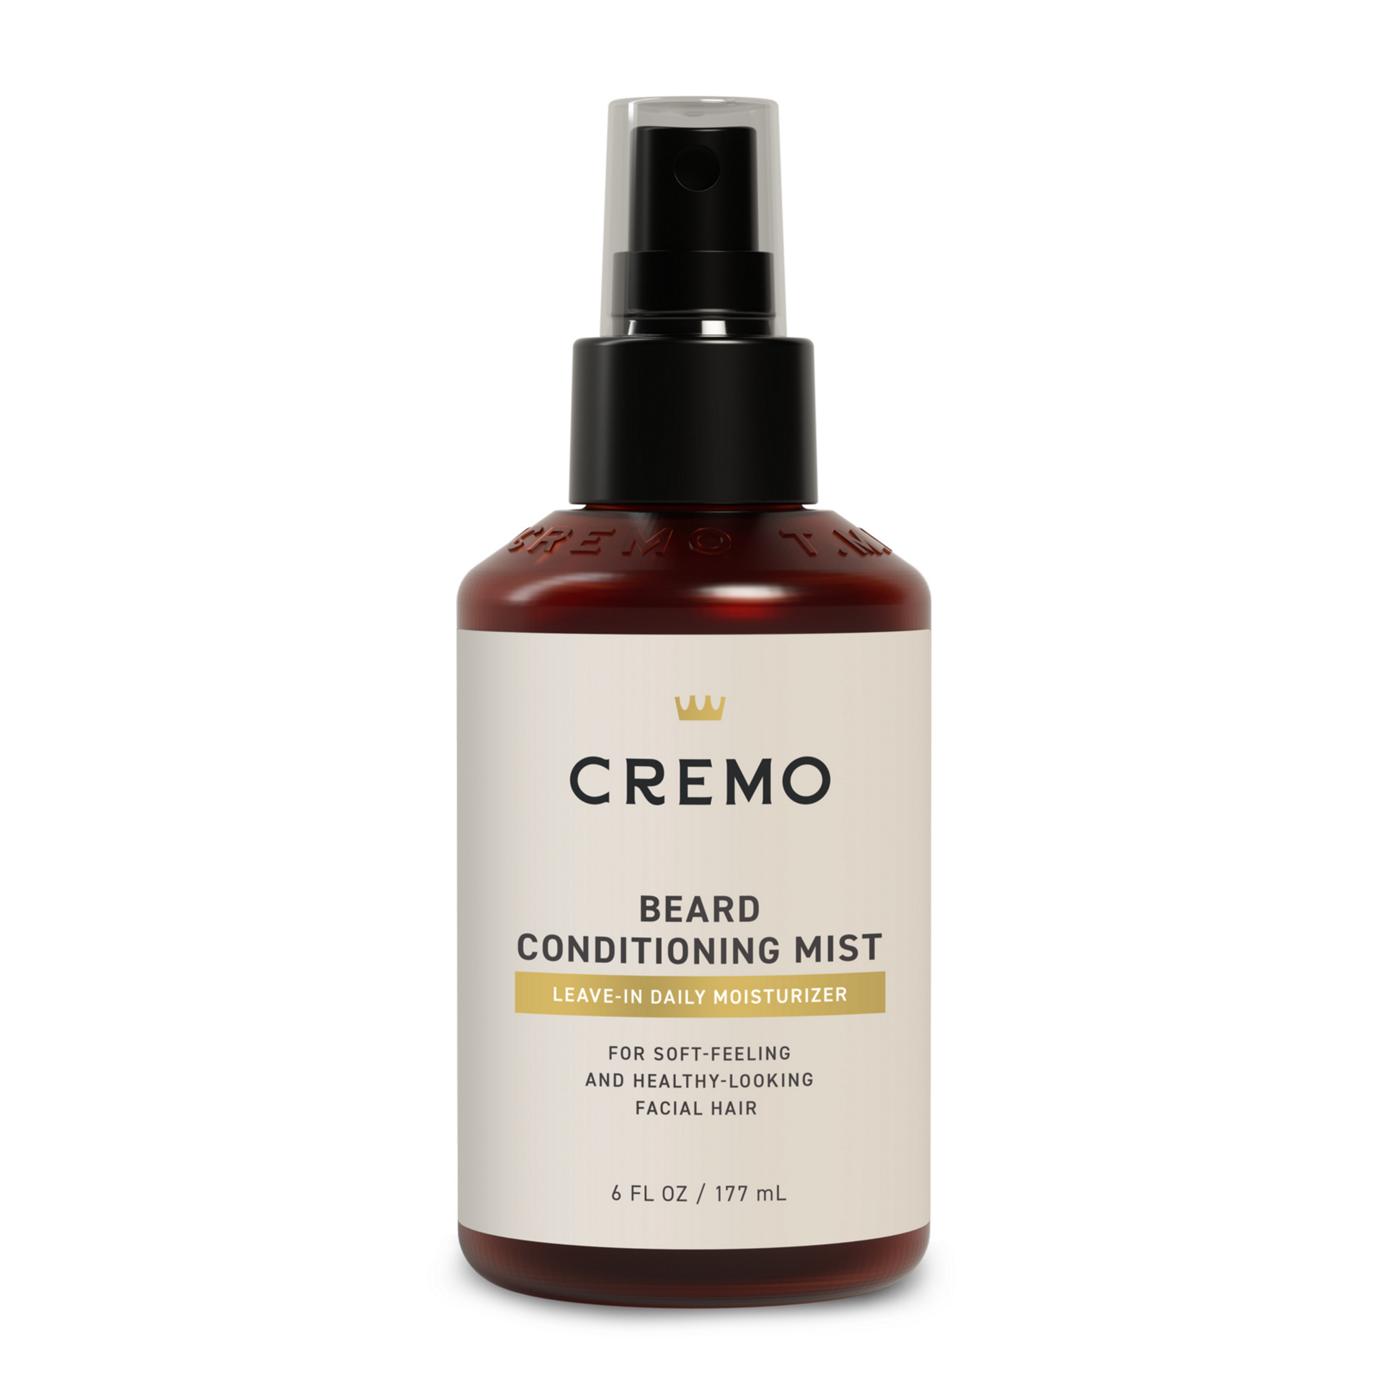 Cremo Beard Conditioning Mist Leave-In Daily Moisturizer; image 1 of 4